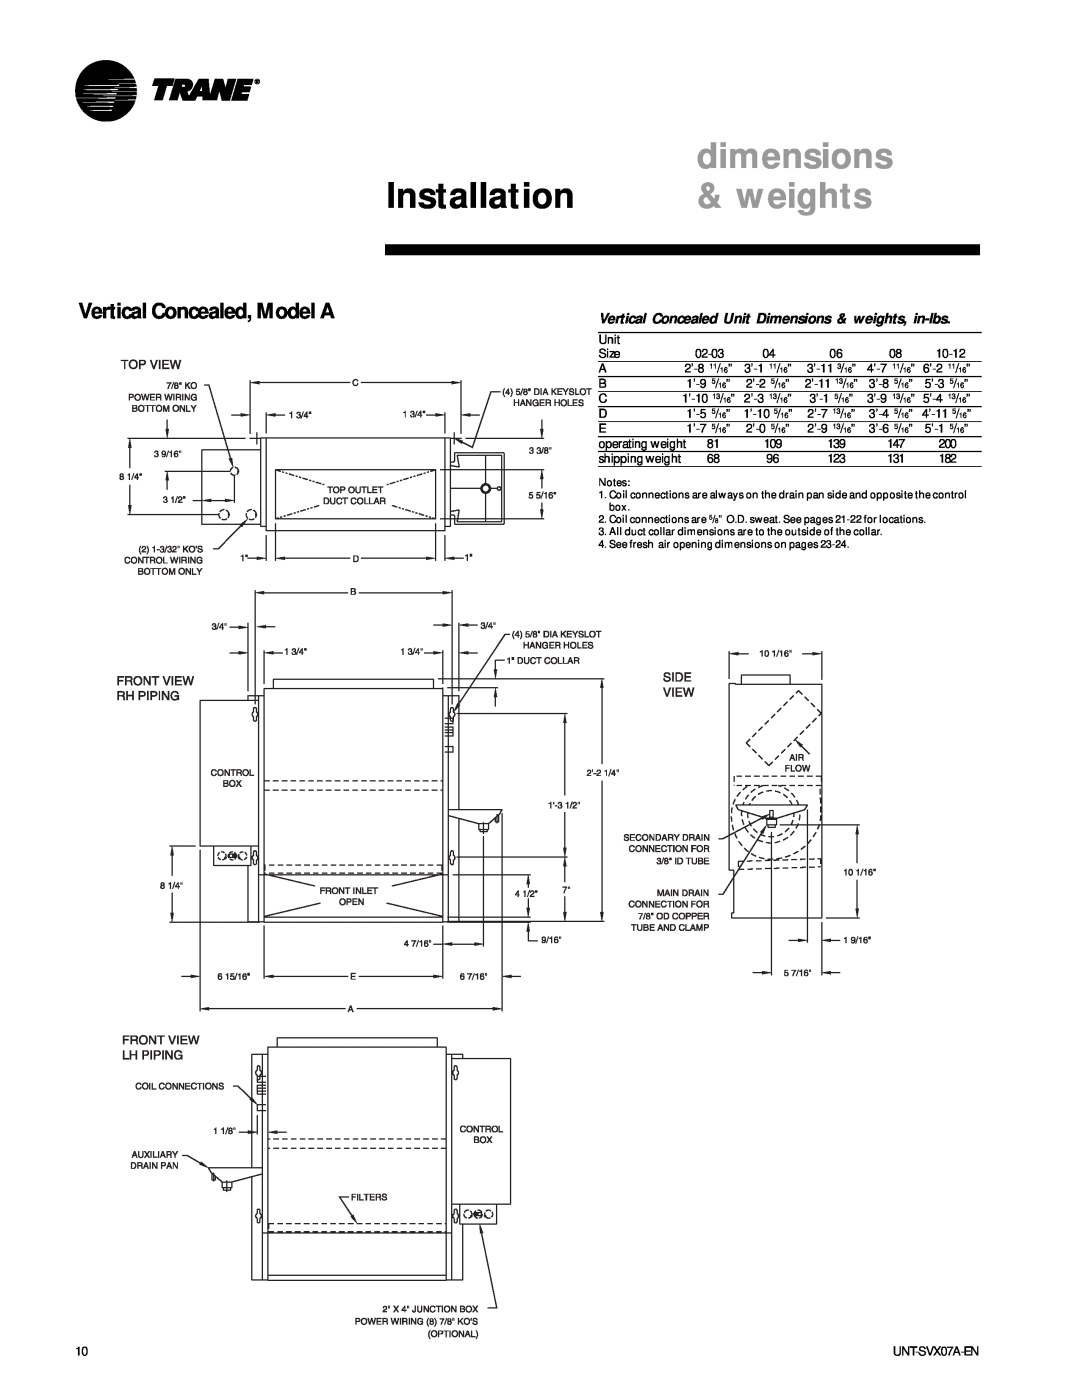 Trane UNT-SVX07A-EN manual dimensions, Installation, weights, Vertical Concealed, Model A 